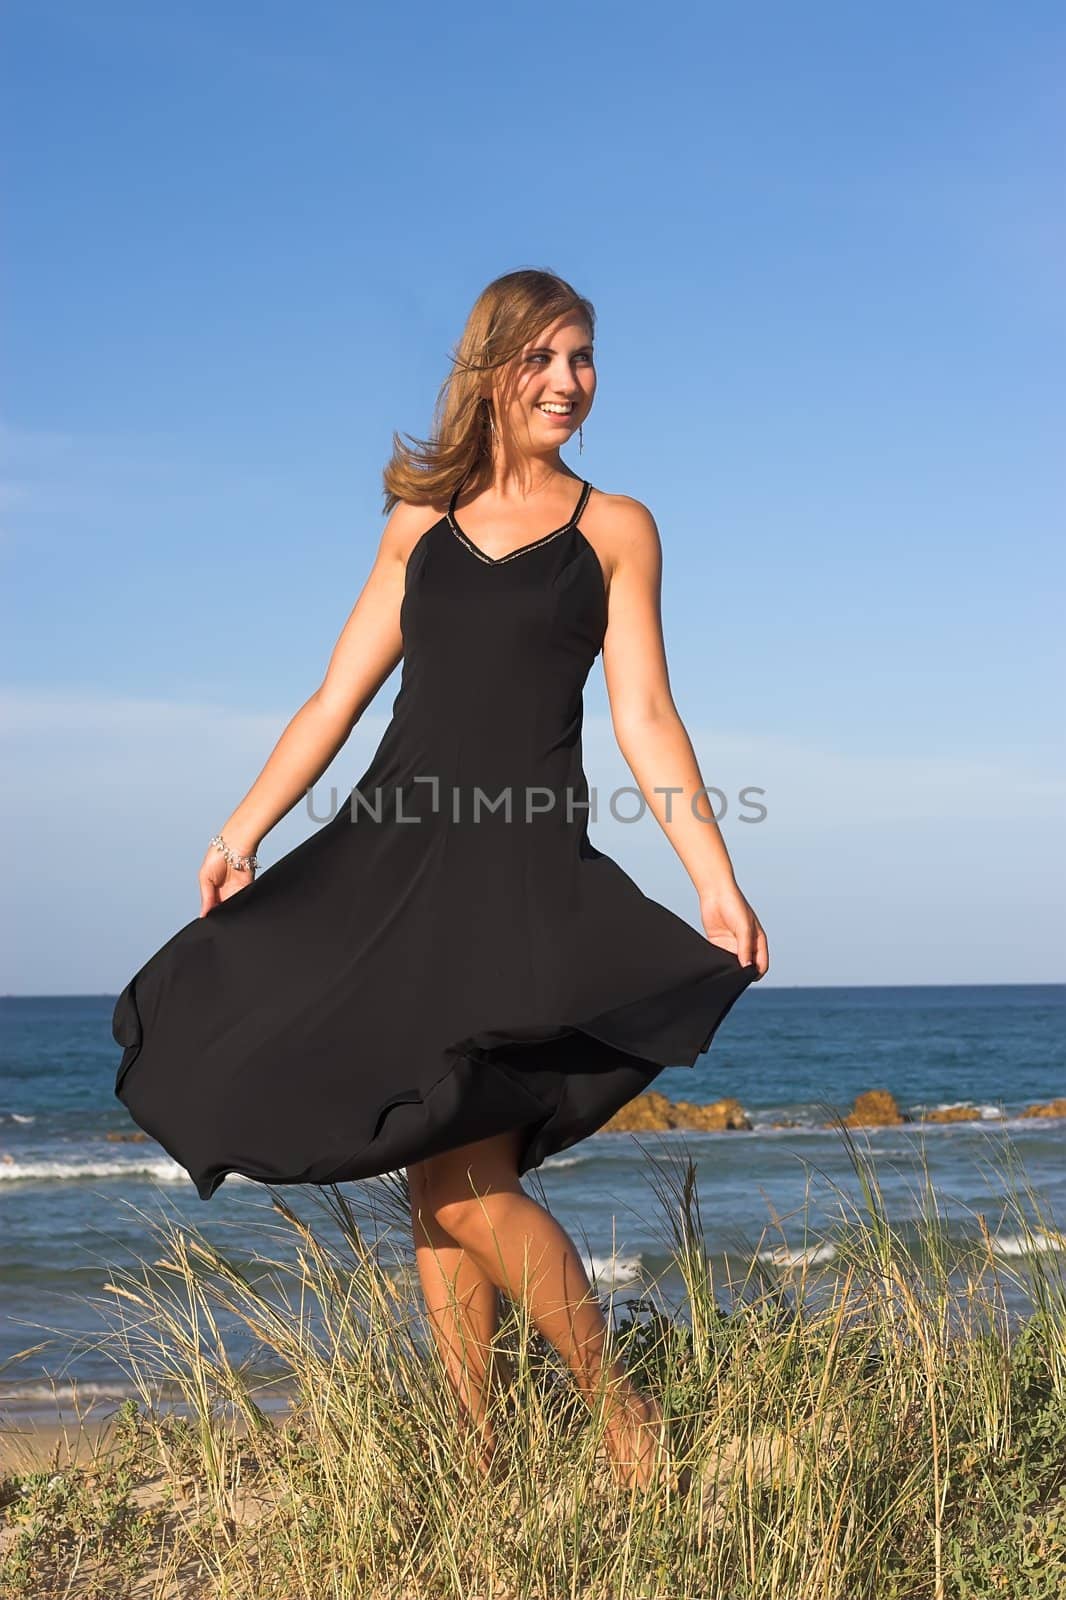 Young Teenage girl swirling her dress in the wind at the beach